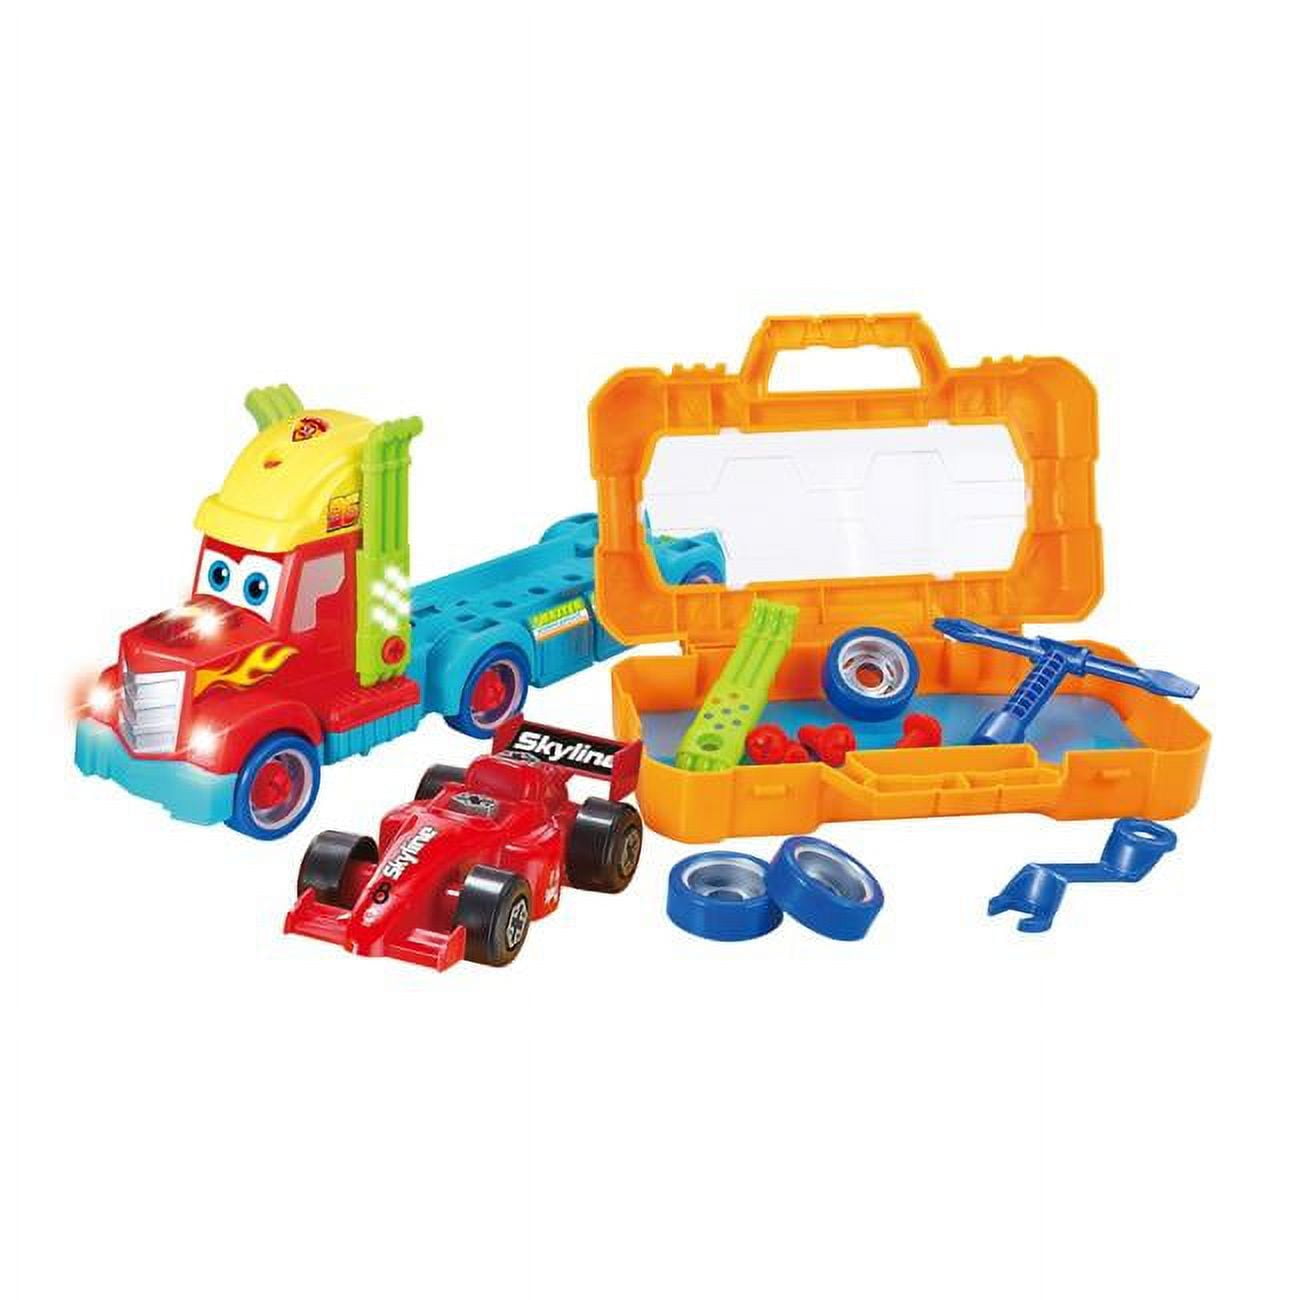 Ps194 Take-a Part Carrier Tool Box With Racing Car & Lights & Sounds